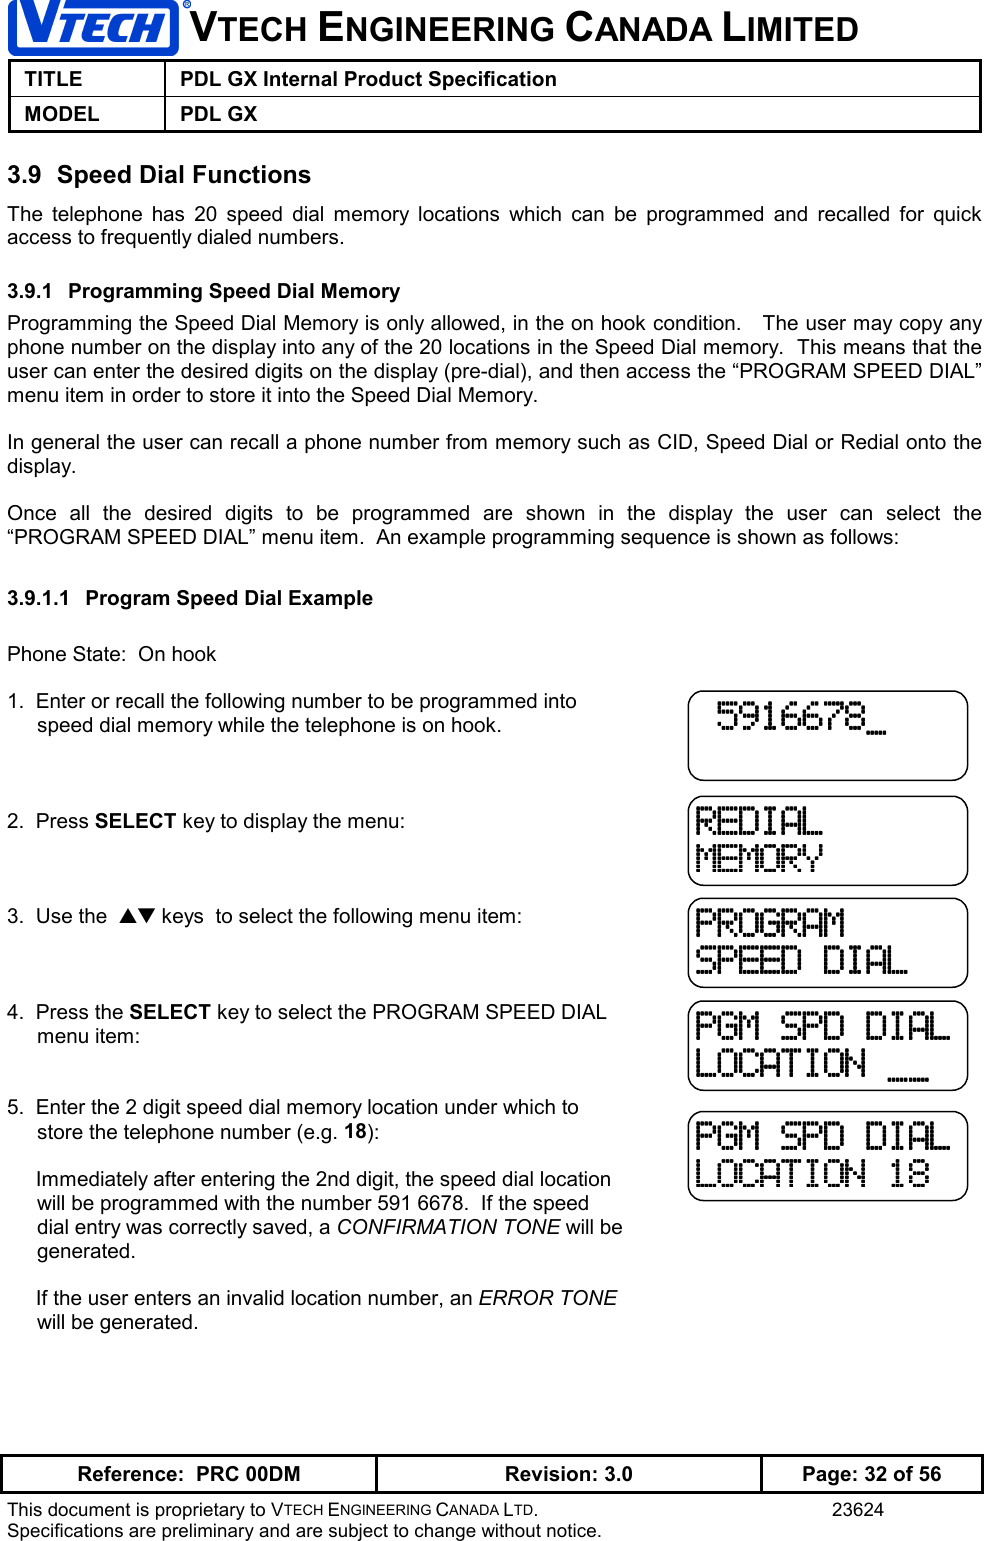 VTECH ENGINEERING CANADA LIMITEDTITLE PDL GX Internal Product SpecificationMODEL PDL GXReference:  PRC 00DM Revision: 3.0 Page: 32 of 56This document is proprietary to VTECH ENGINEERING CANADA LTD. 23624Specifications are preliminary and are subject to change without notice.3.9  Speed Dial FunctionsThe telephone has 20 speed dial memory locations which can be programmed and recalled for quickaccess to frequently dialed numbers.3.9.1  Programming Speed Dial MemoryProgramming the Speed Dial Memory is only allowed, in the on hook condition.   The user may copy anyphone number on the display into any of the 20 locations in the Speed Dial memory.  This means that theuser can enter the desired digits on the display (pre-dial), and then access the “PROGRAM SPEED DIAL”menu item in order to store it into the Speed Dial Memory.In general the user can recall a phone number from memory such as CID, Speed Dial or Redial onto thedisplay.Once all the desired digits to be programmed are shown in the display the user can select the“PROGRAM SPEED DIAL” menu item.  An example programming sequence is shown as follows:3.9.1.1  Program Speed Dial ExamplePhone State:  On hook1.  Enter or recall the following number to be programmed intospeed dial memory while the telephone is on hook.2.  Press SELECT key to display the menu:3.  Use the  ▲▼ keys  to select the following menu item:4.  Press the SELECT key to select the PROGRAM SPEED DIALmenu item:5.  Enter the 2 digit speed dial memory location under which tostore the telephone number (e.g. 18):     Immediately after entering the 2nd digit, the speed dial locationwill be programmed with the number 591 6678.  If the speeddial entry was correctly saved, a CONFIRMATION TONE will begenerated.     If the user enters an invalid location number, an ERROR TONEwill be generated. 5916678_ 5916678_ 5916678_ 5916678_REDIALREDIALREDIALREDIALMEMORYMEMORYMEMORYMEMORYPROGRAMPROGRAMPROGRAMPROGRAMSPEED DIALSPEED DIALSPEED DIALSPEED DIALPGM SPD DIALPGM SPD DIALPGM SPD DIALPGM SPD DIALLOCATION __LOCATION __LOCATION __LOCATION __PGM SPD DIALPGM SPD DIALPGM SPD DIALPGM SPD DIALLOCATION 18LOCATION 18LOCATION 18LOCATION 18